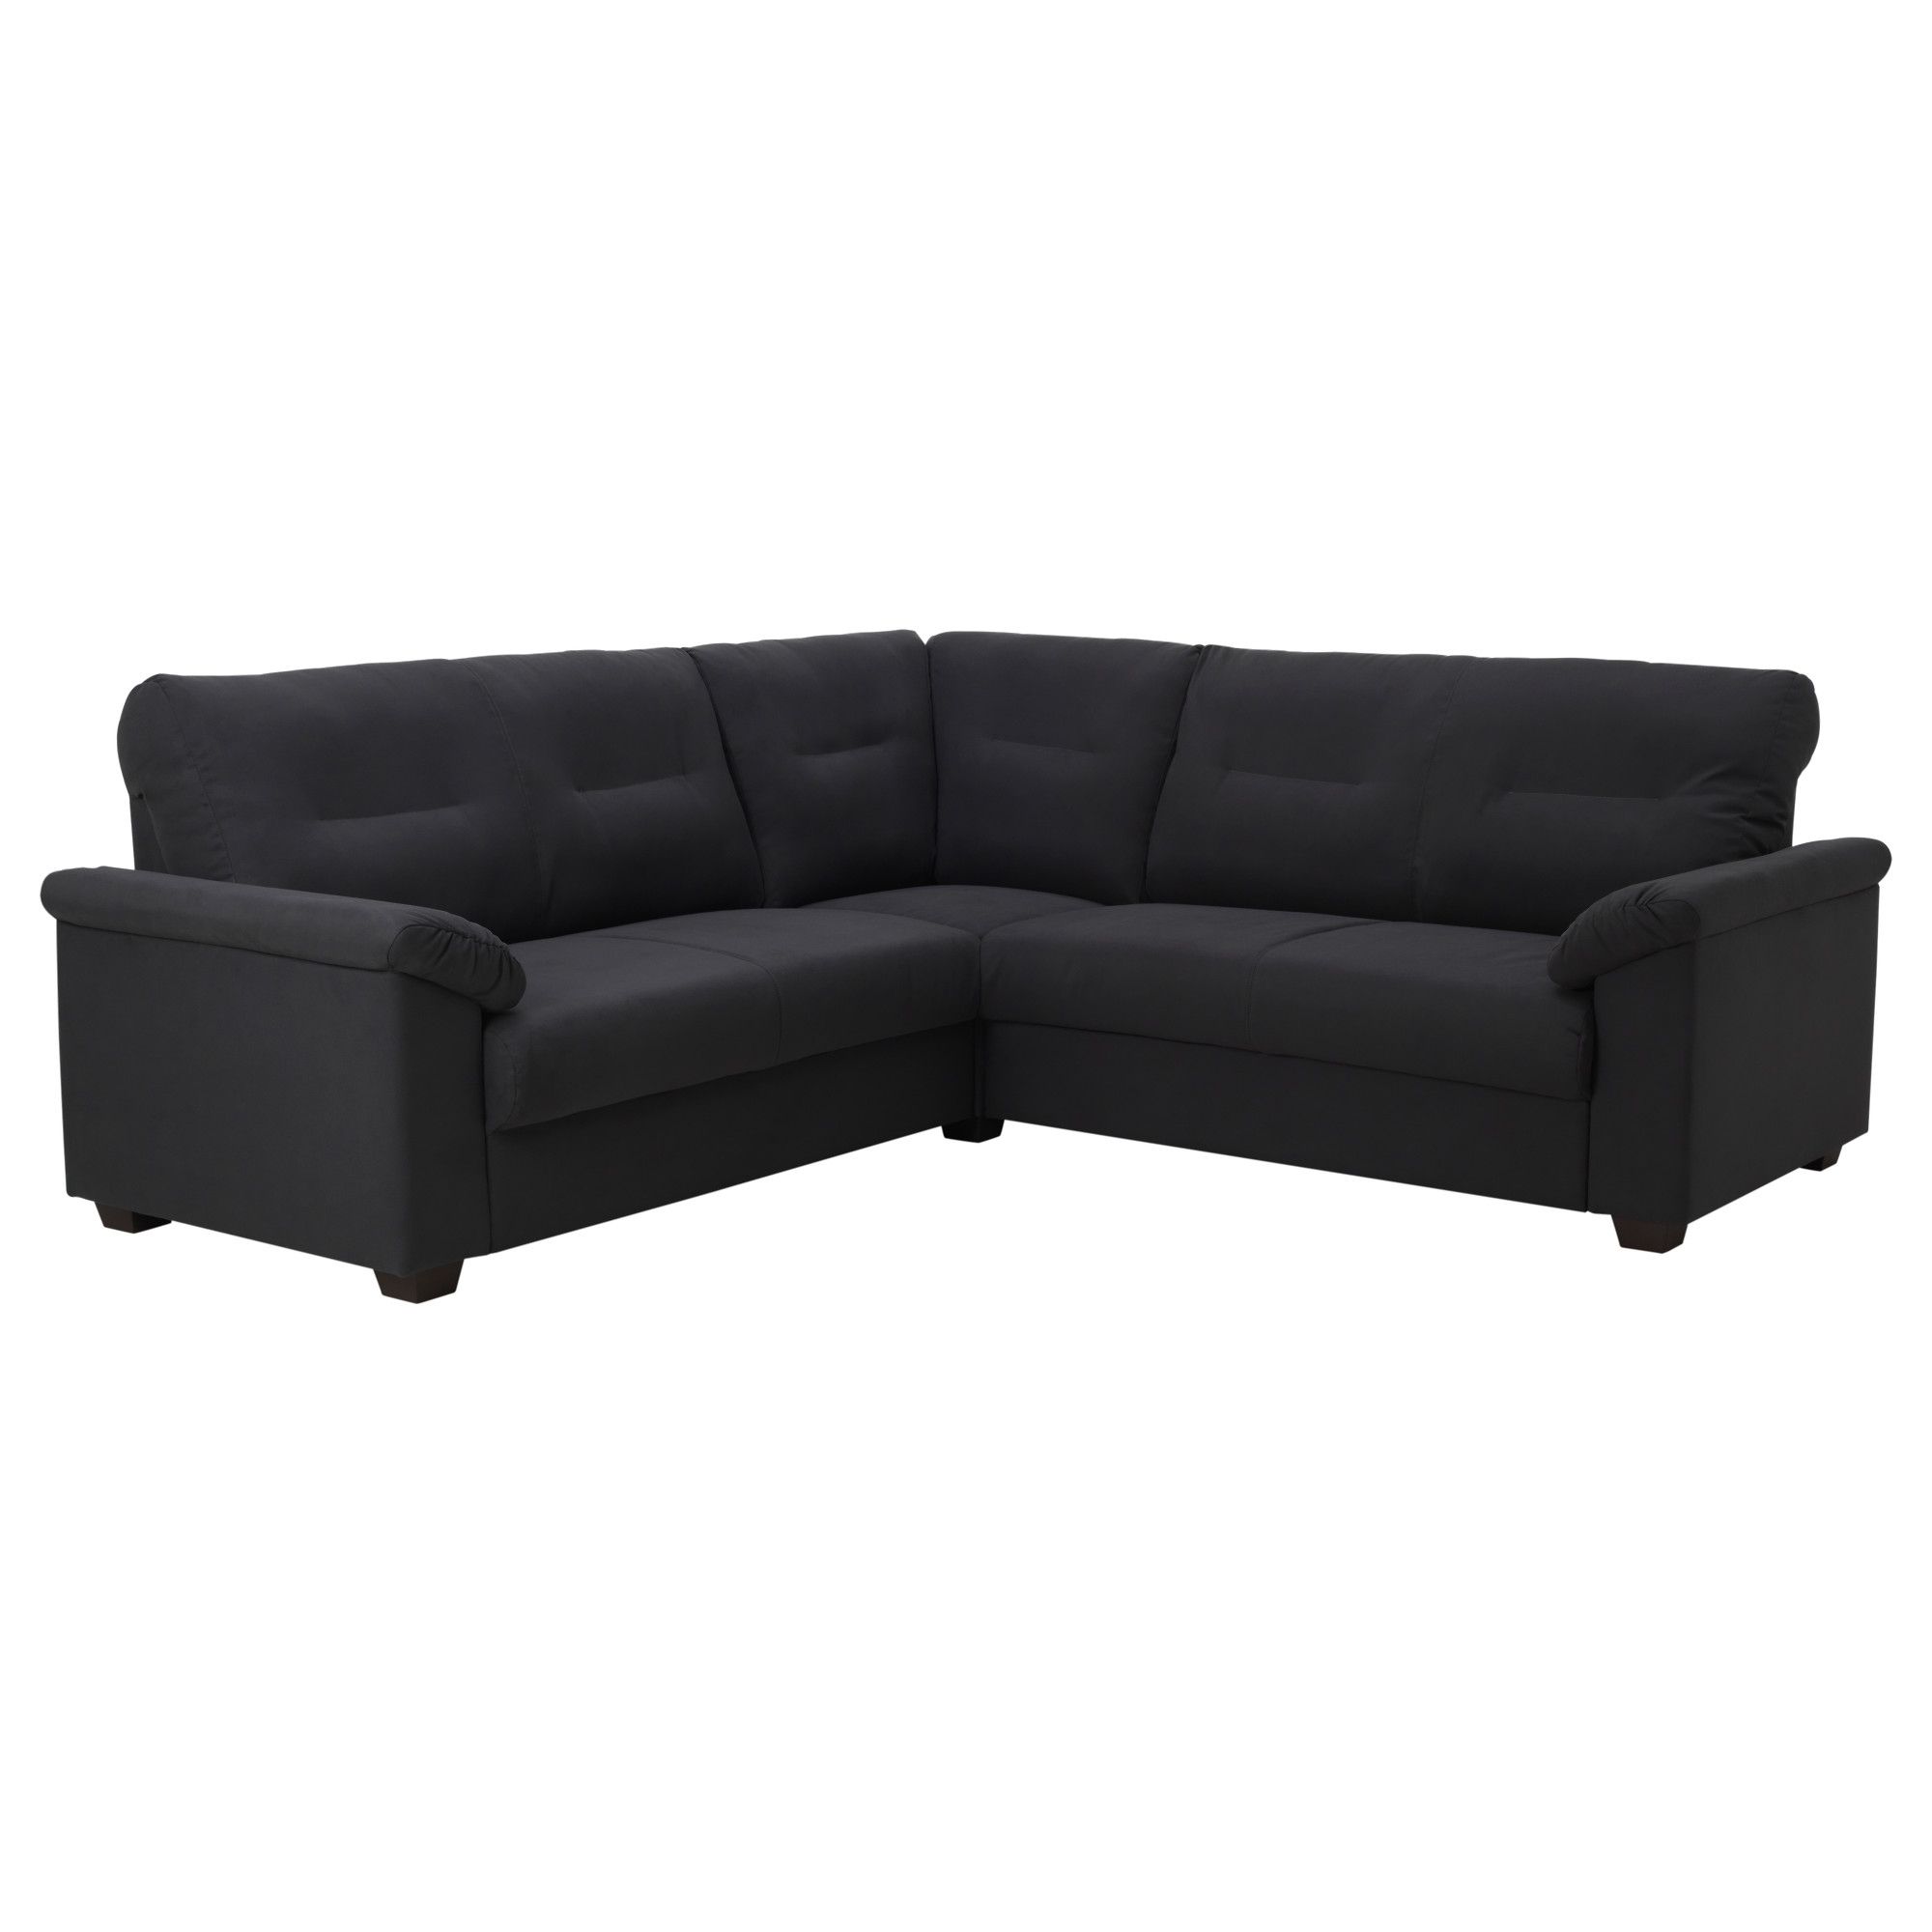 Fabric Sectional Sofas Modern Contemporary Ikea Inside Contemporary Black Leather Sectional Sofa Left Side Chaise (View 15 of 15)